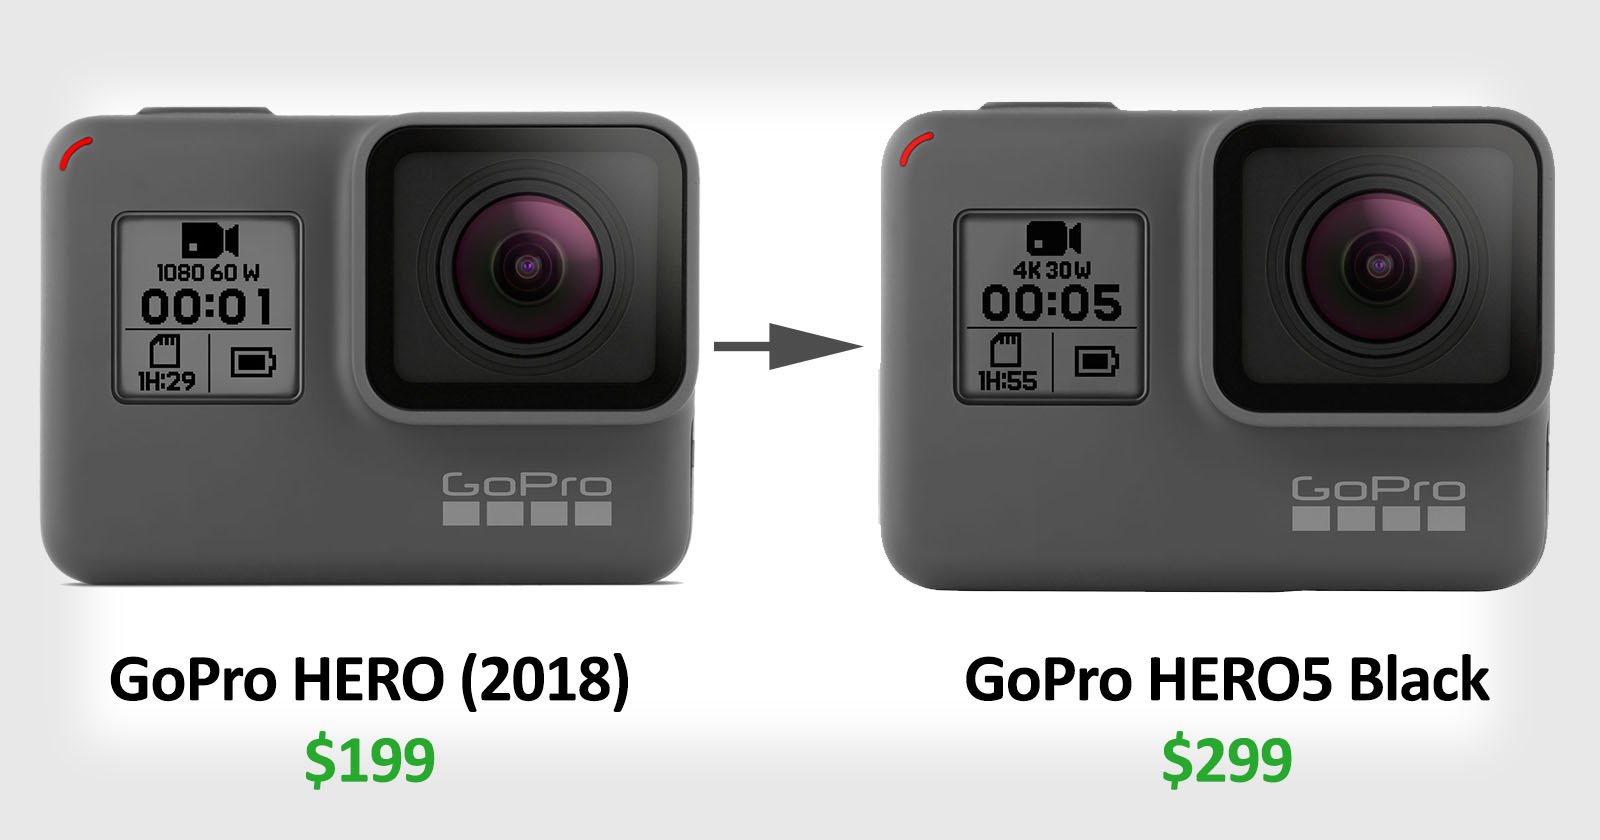 The GoPro HERO is Actually a HERO5 with 'Crippled Firmware